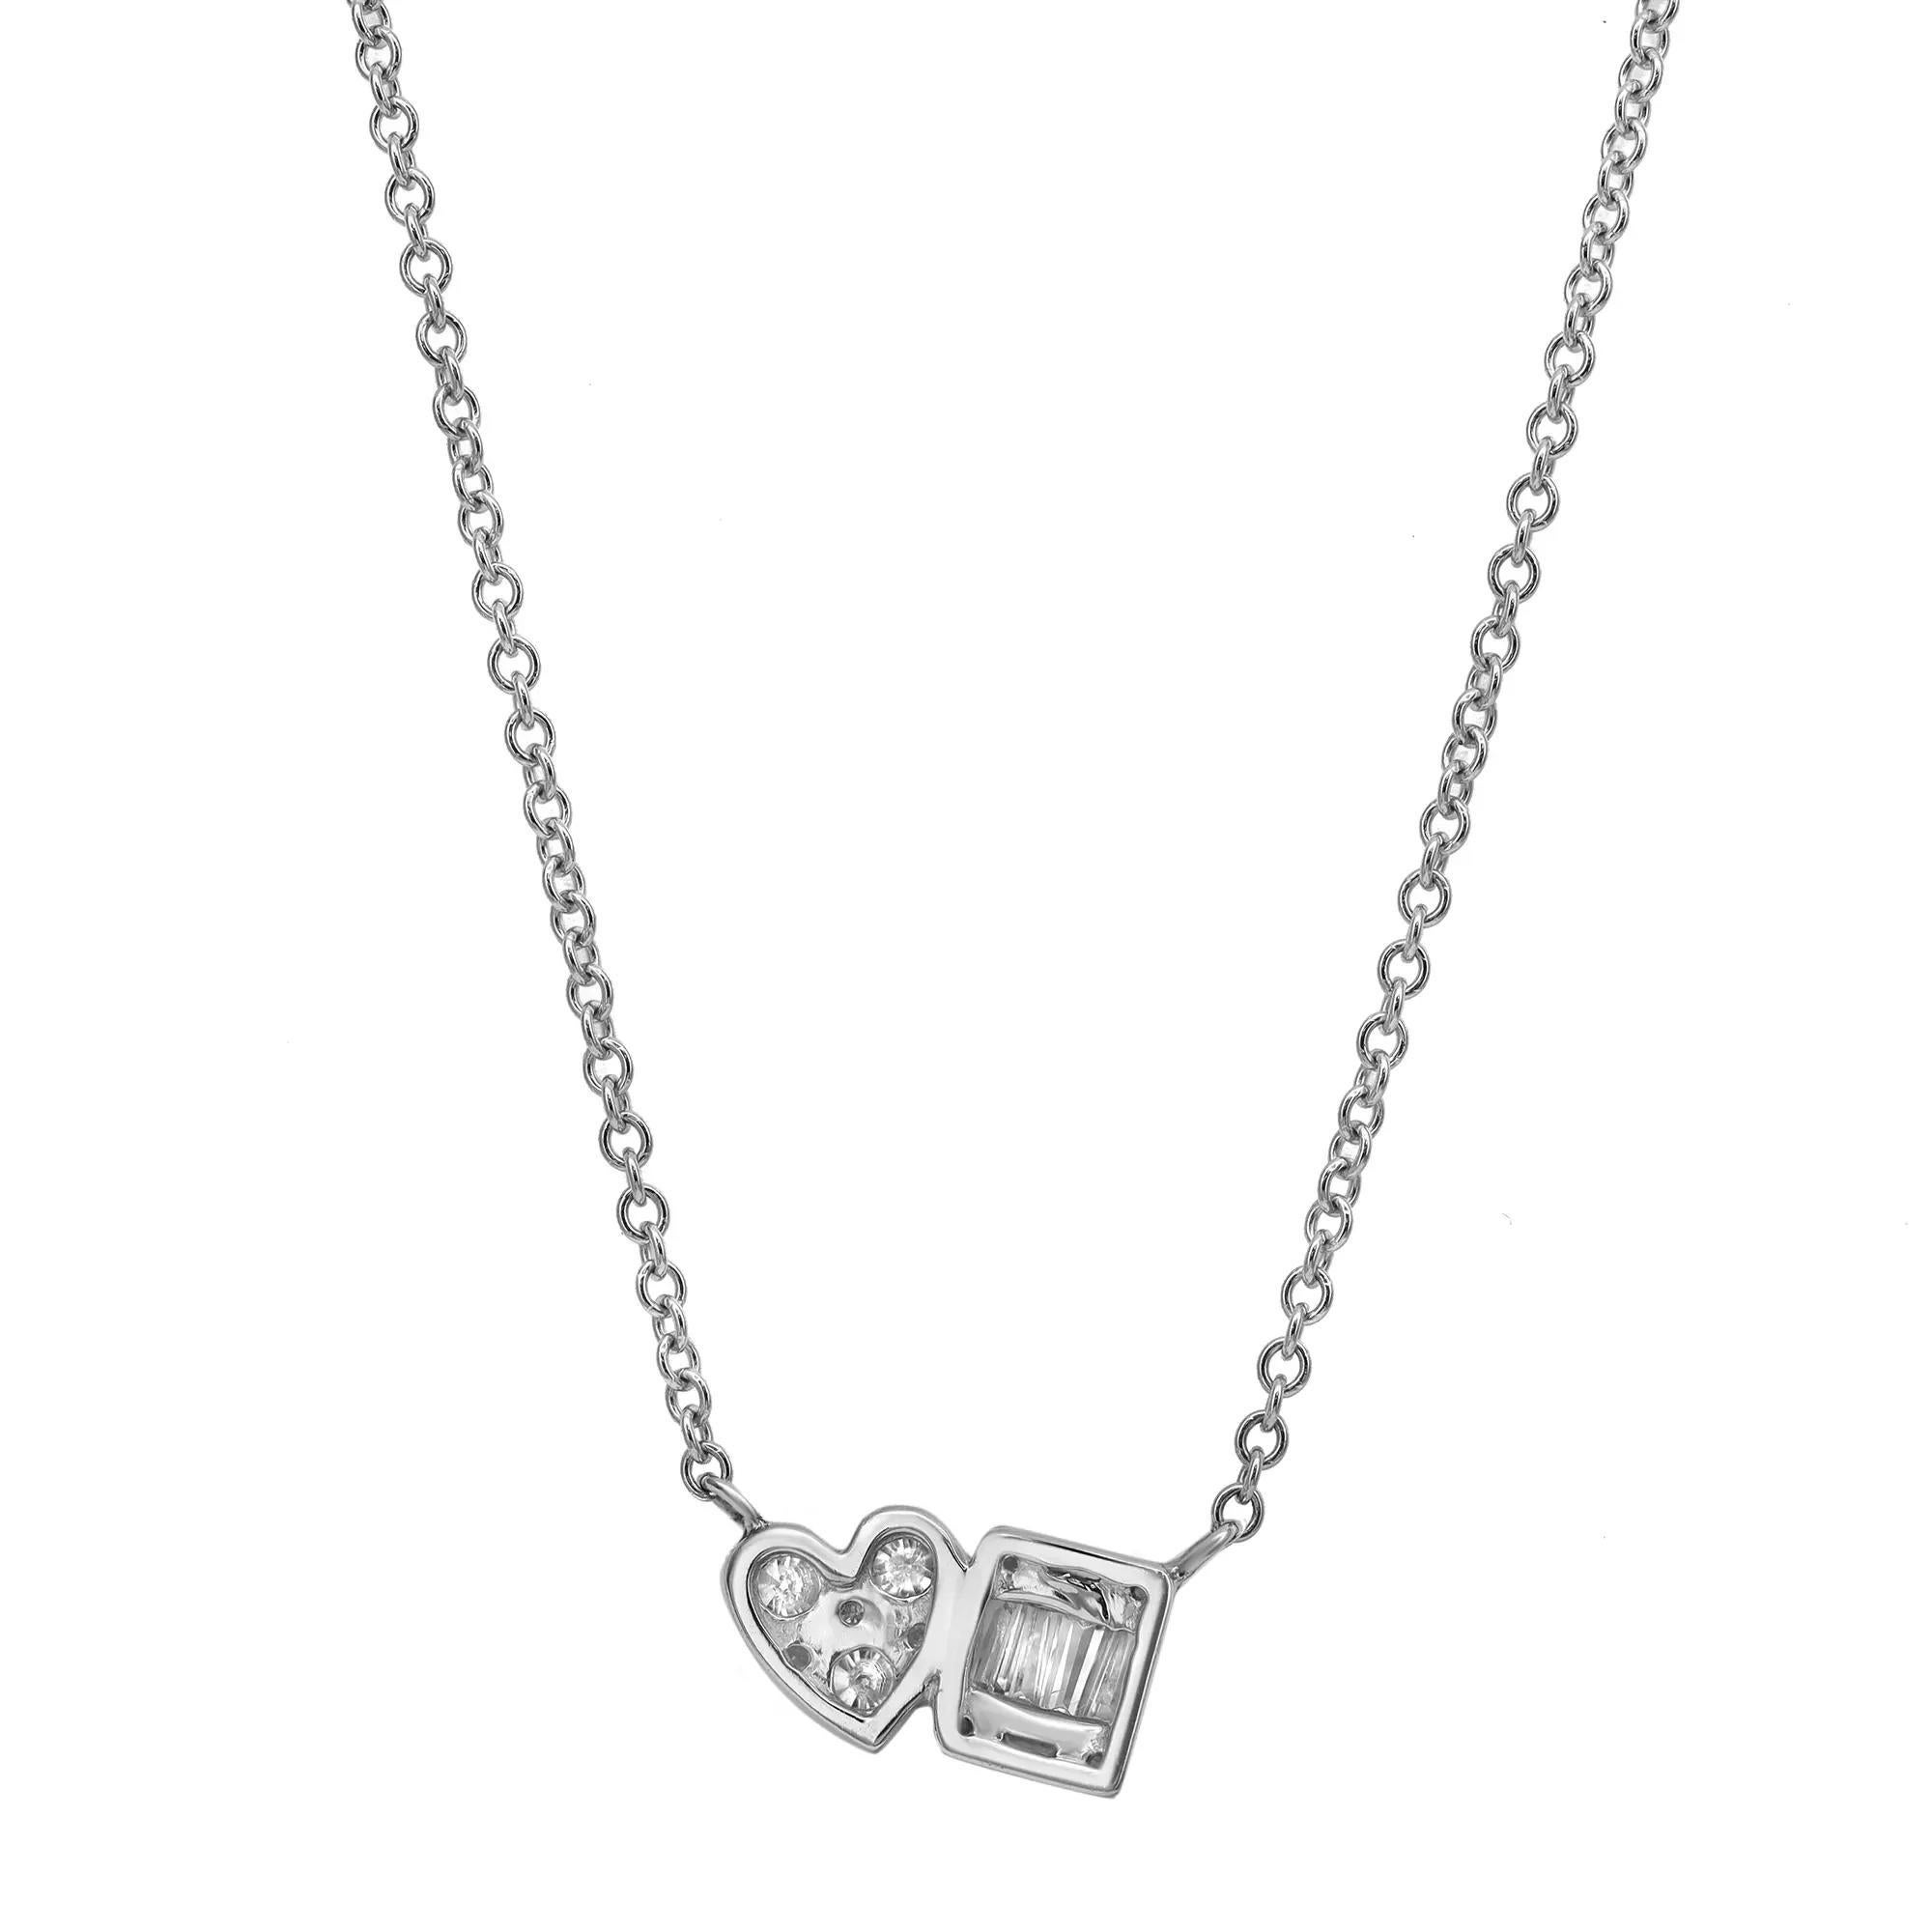 Modern Baguette And Round Cut Diamond Pendant Necklace 14K White Gold 0.44Cttw For Sale